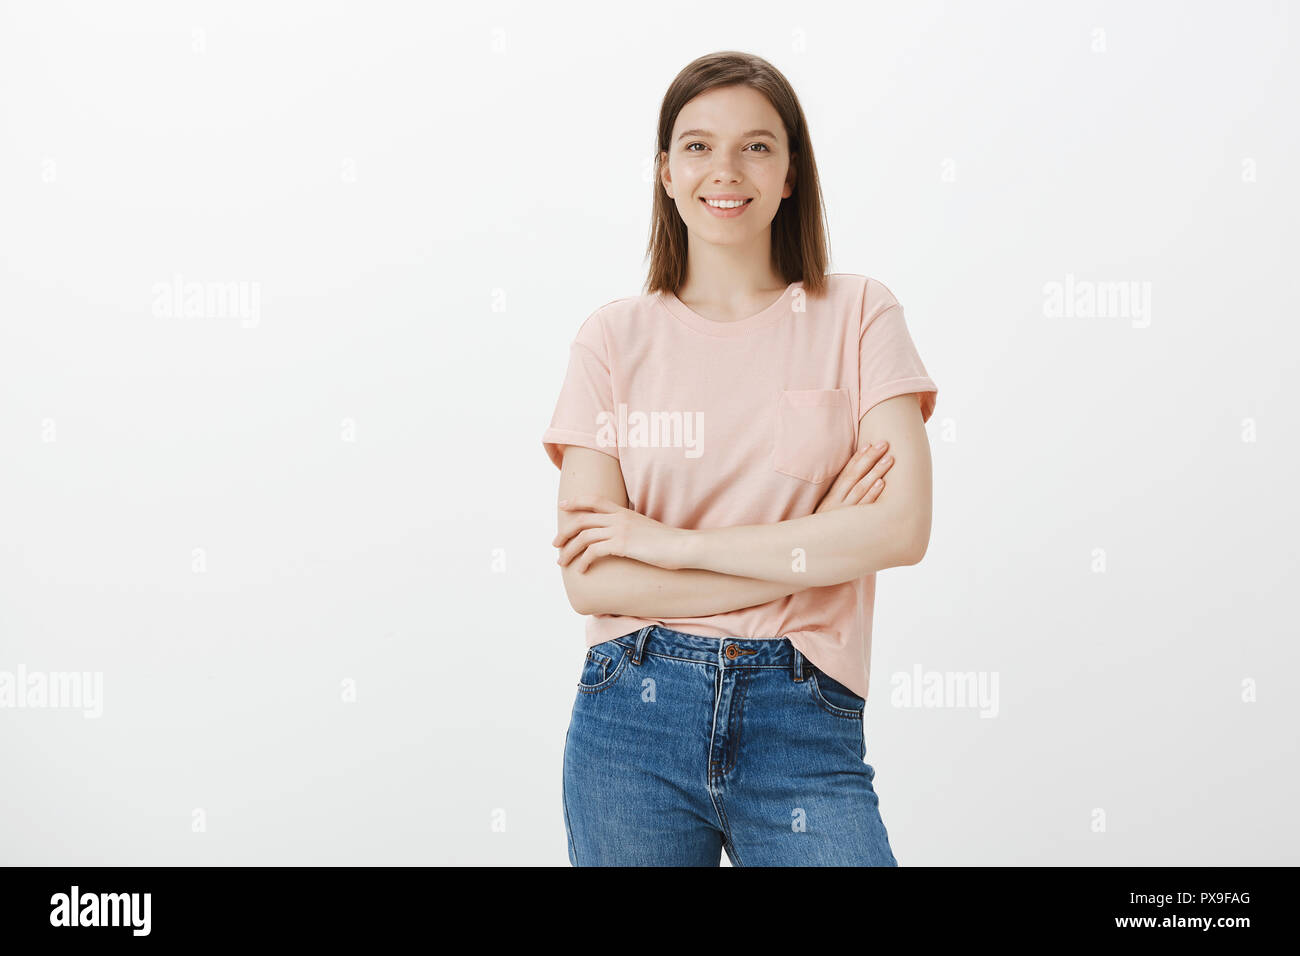 Good-looking self-assured caucasian female model in trendy t-shirt and jeans holding hands crossed on chest and smiling joyfully, expressing confident and happy attitude, standing over gray background Stock Photo